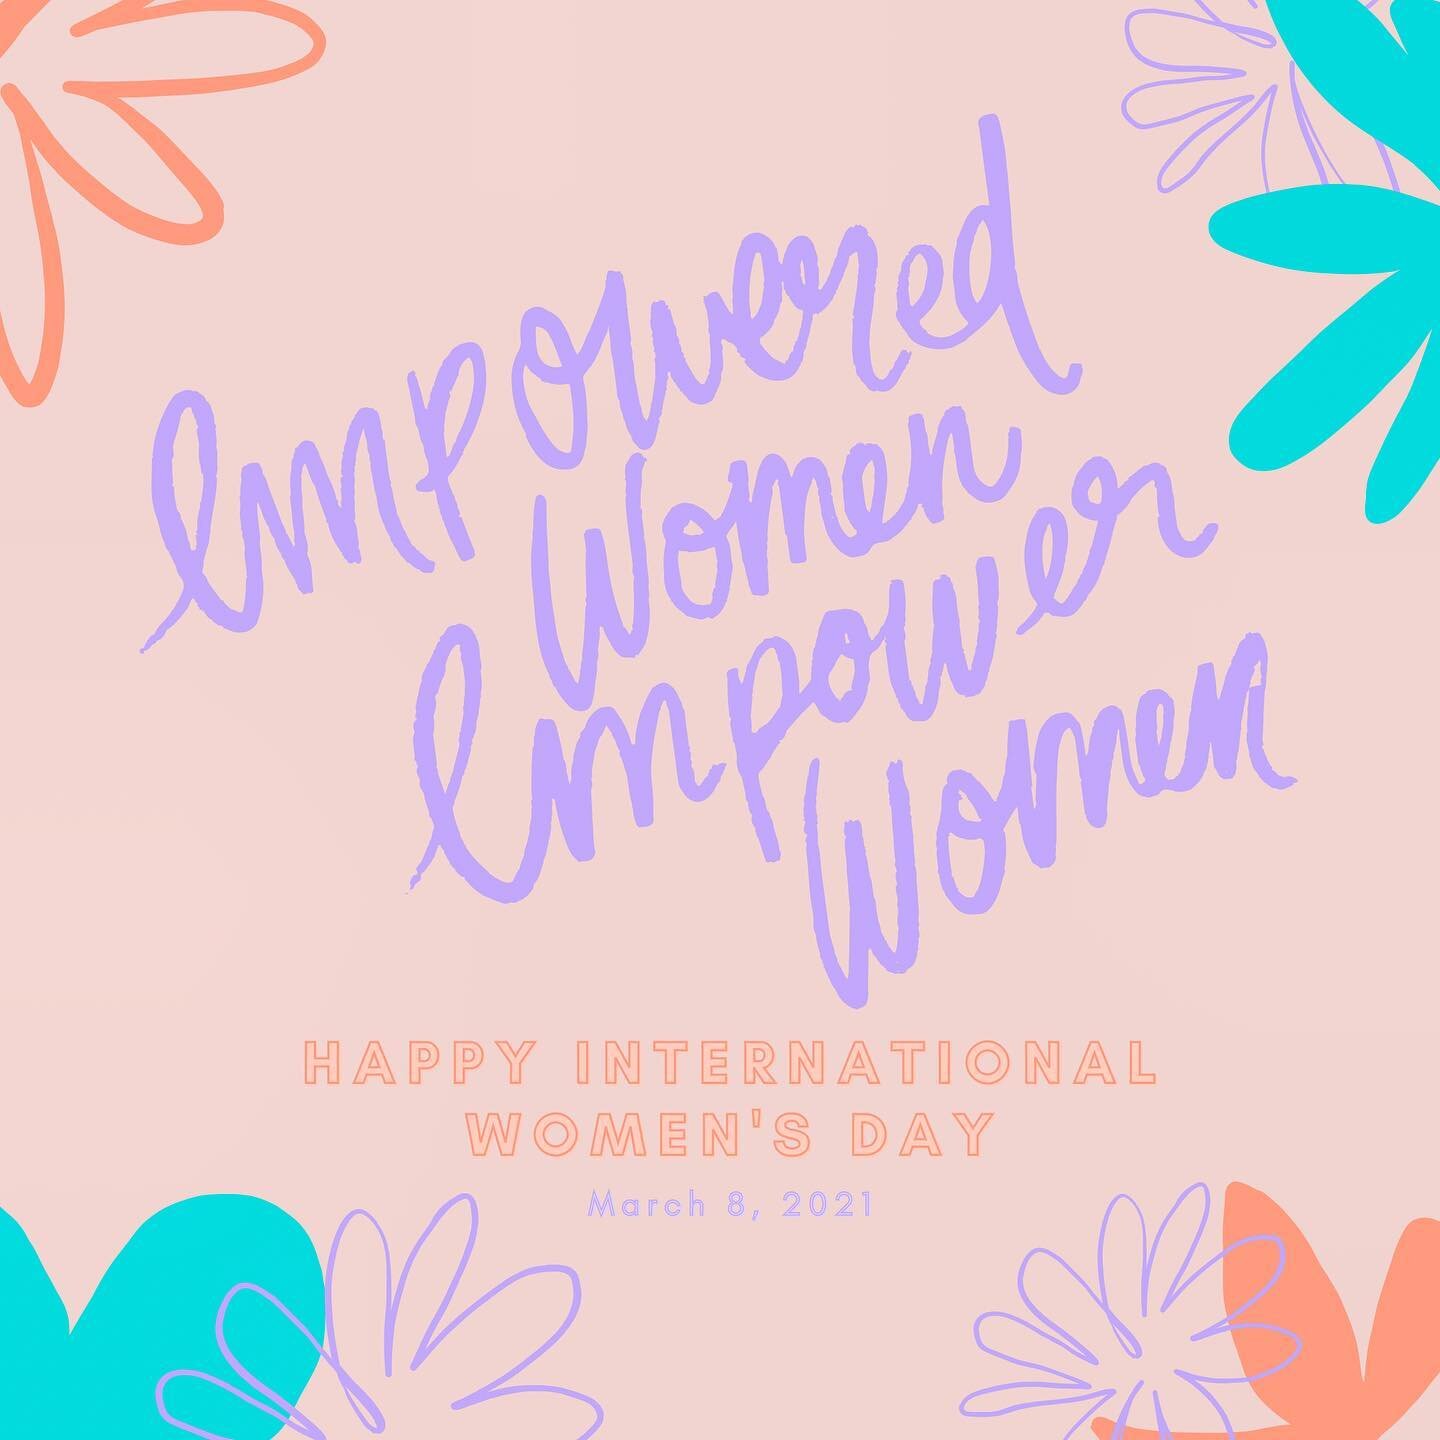 ✨HAPPY WOMEN&rsquo;S DAY✨
🎉Happy Women&rsquo;s Day to all the powerful, strong, courageous badass females out there, doing their thing, using their voice, creating CHANGE for the future. There&rsquo;s a lot of work to be done for #womenequality - it